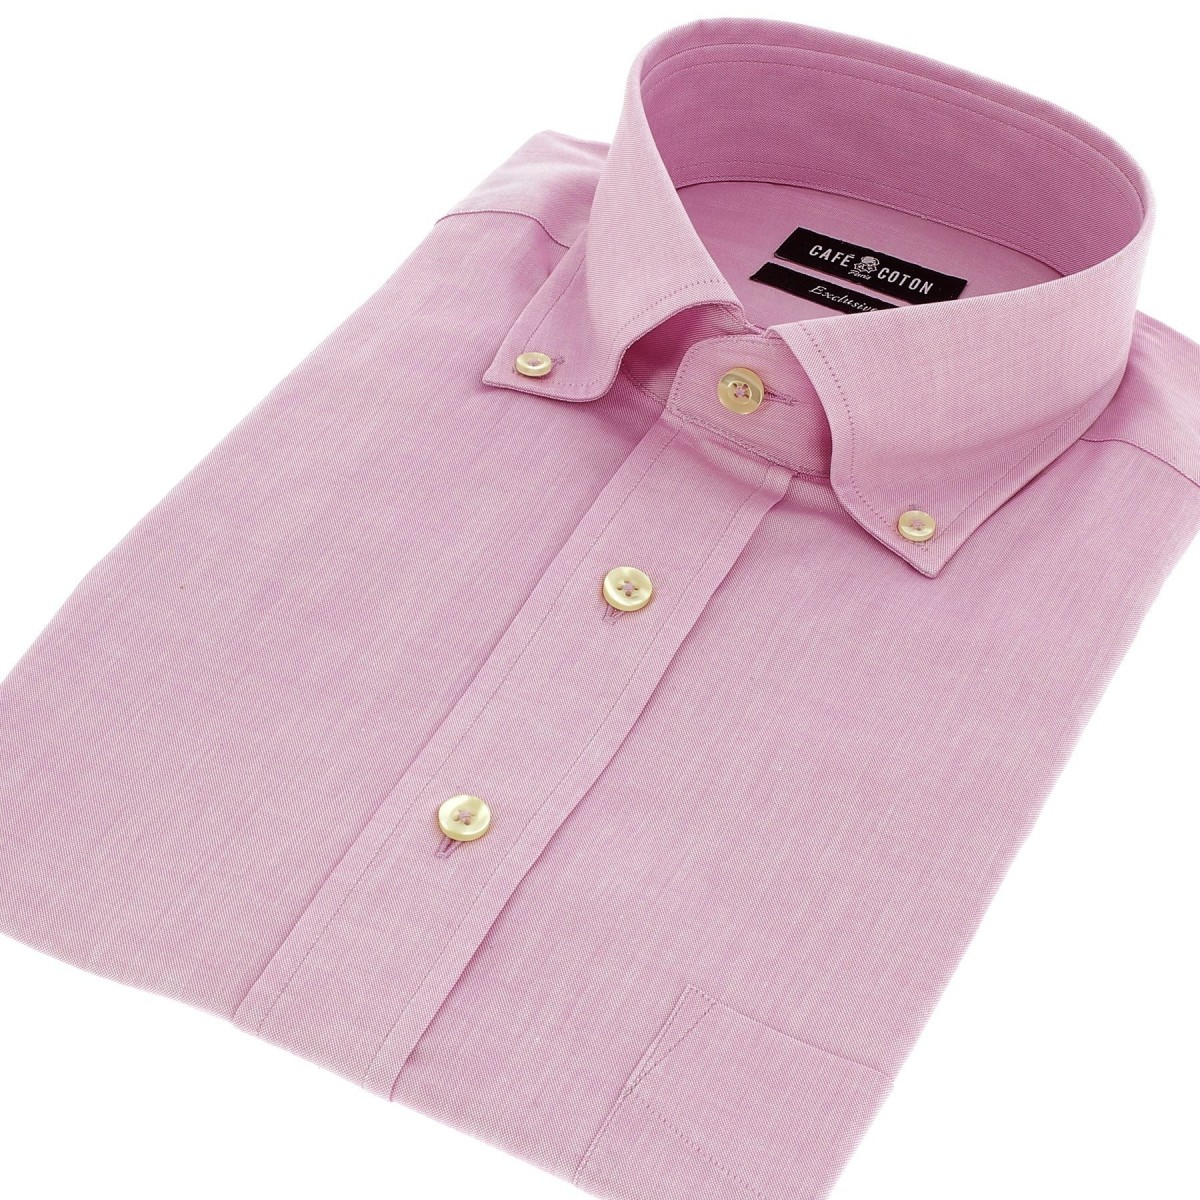 CHEMISE CAFE COTON EXCLUSIVE ROSE PIN POINT 6 REGULAR FIT